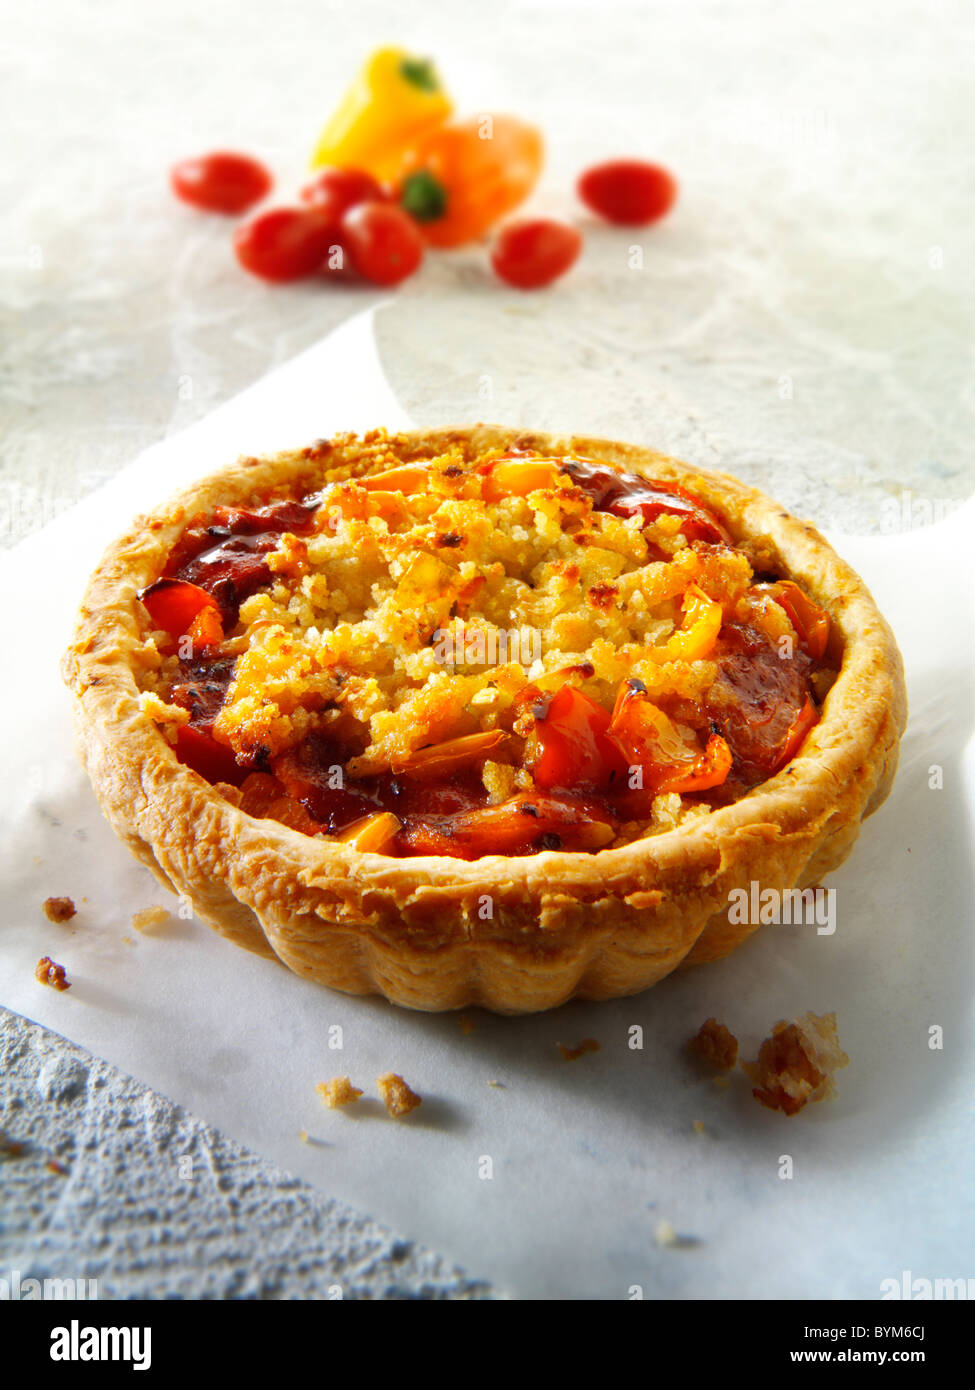 Tomato & Pepper Pastry Tart cooked and ready to eat Stock Photo